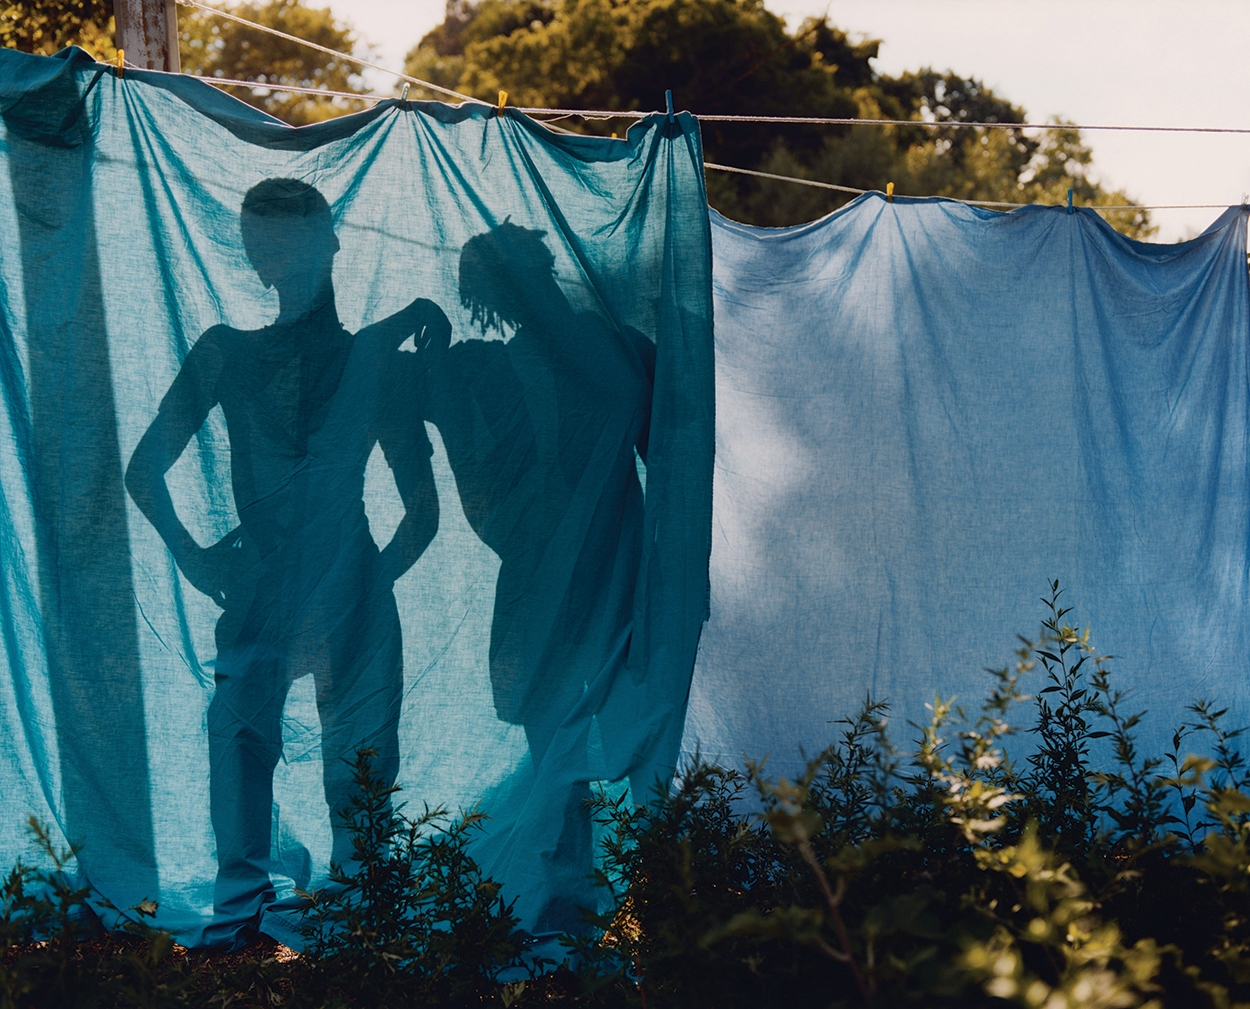 Two shadowy figures that look like young boys are visible through two blue sheets hanging on a laundry line.